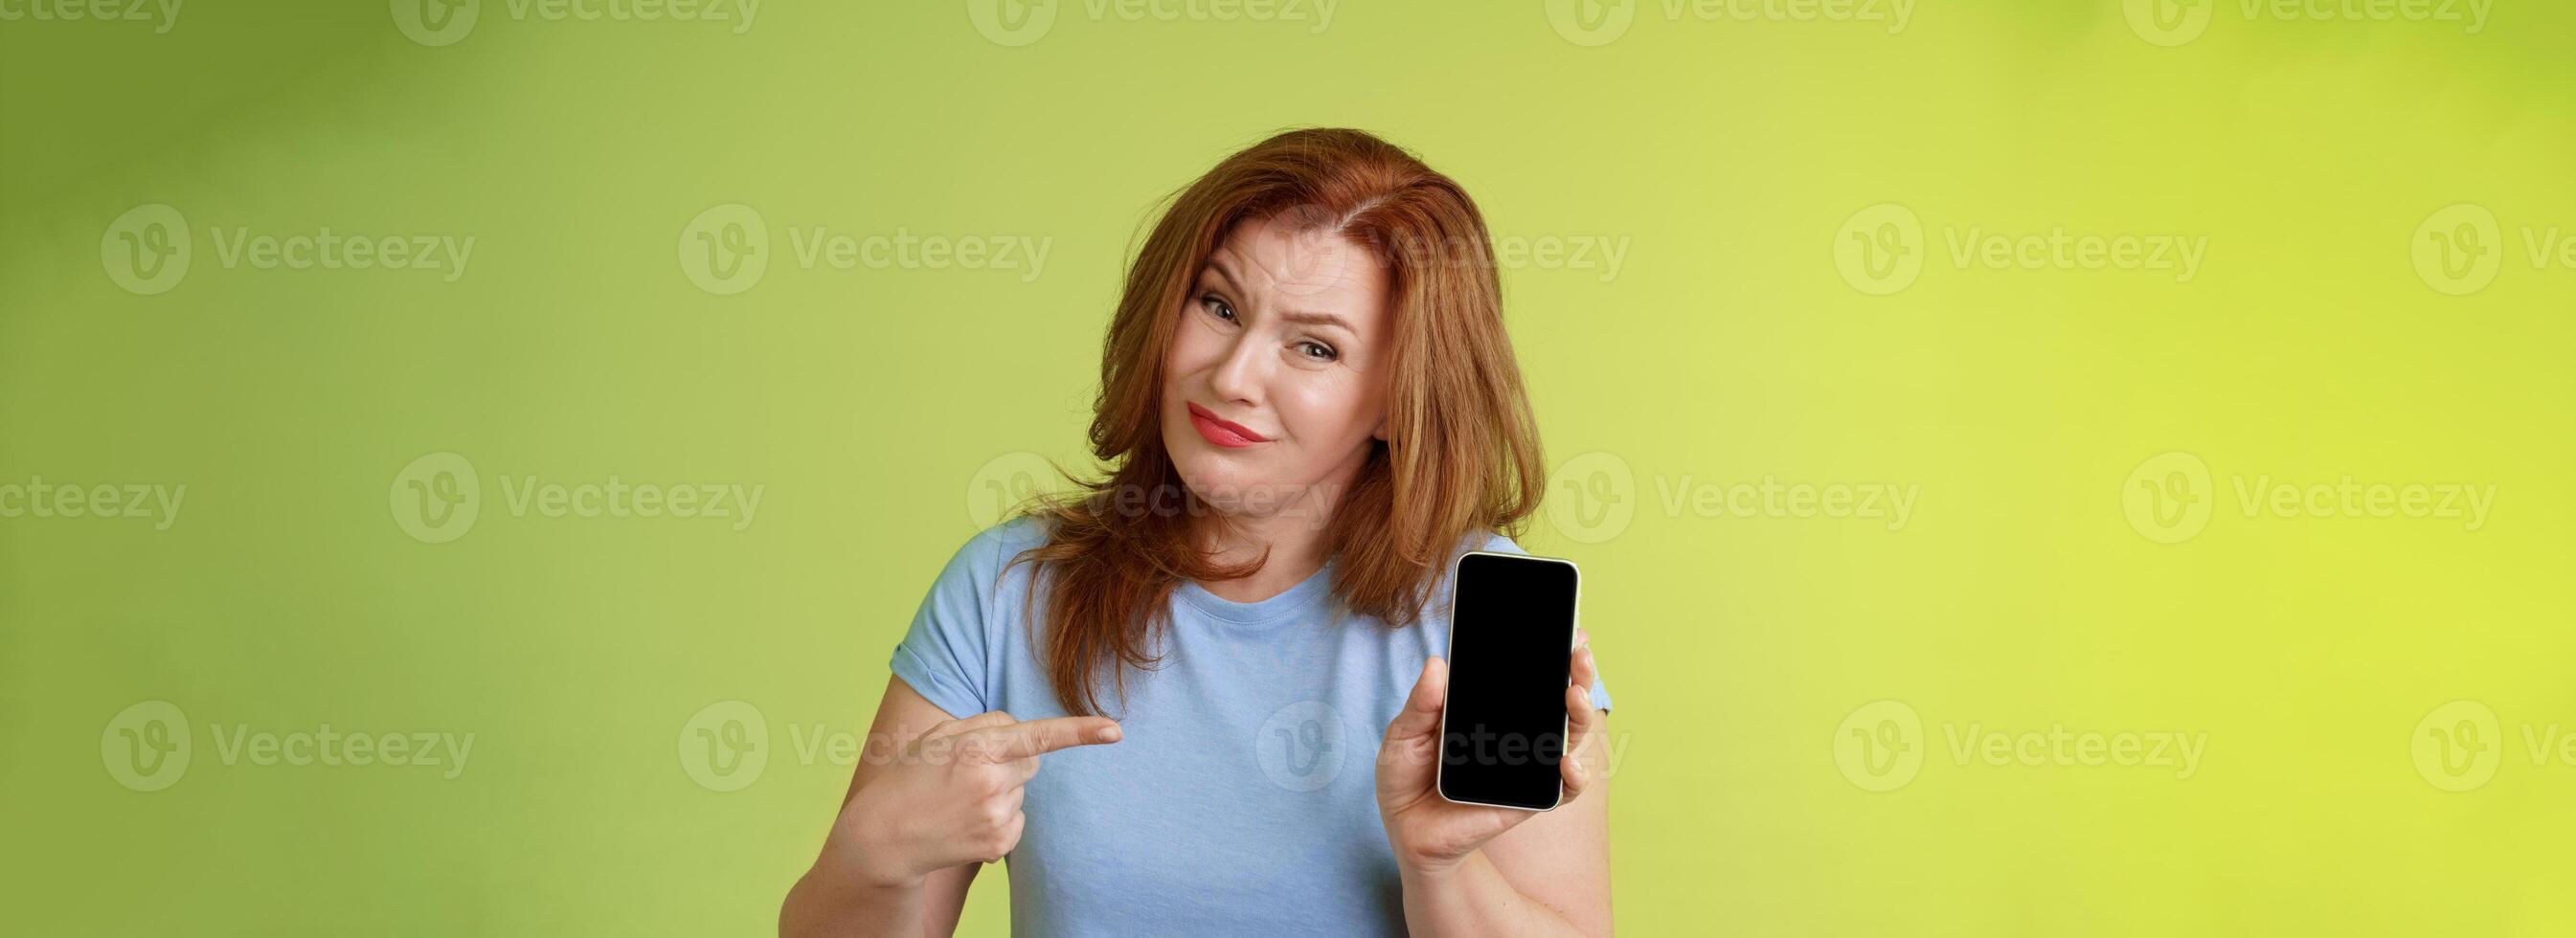 Seriously it awful. Displeased disappointed redhead mature female tilt head cringe grimacing reluctant pointing smartphone blank display index finger showing bad photograph share negative opinion photo